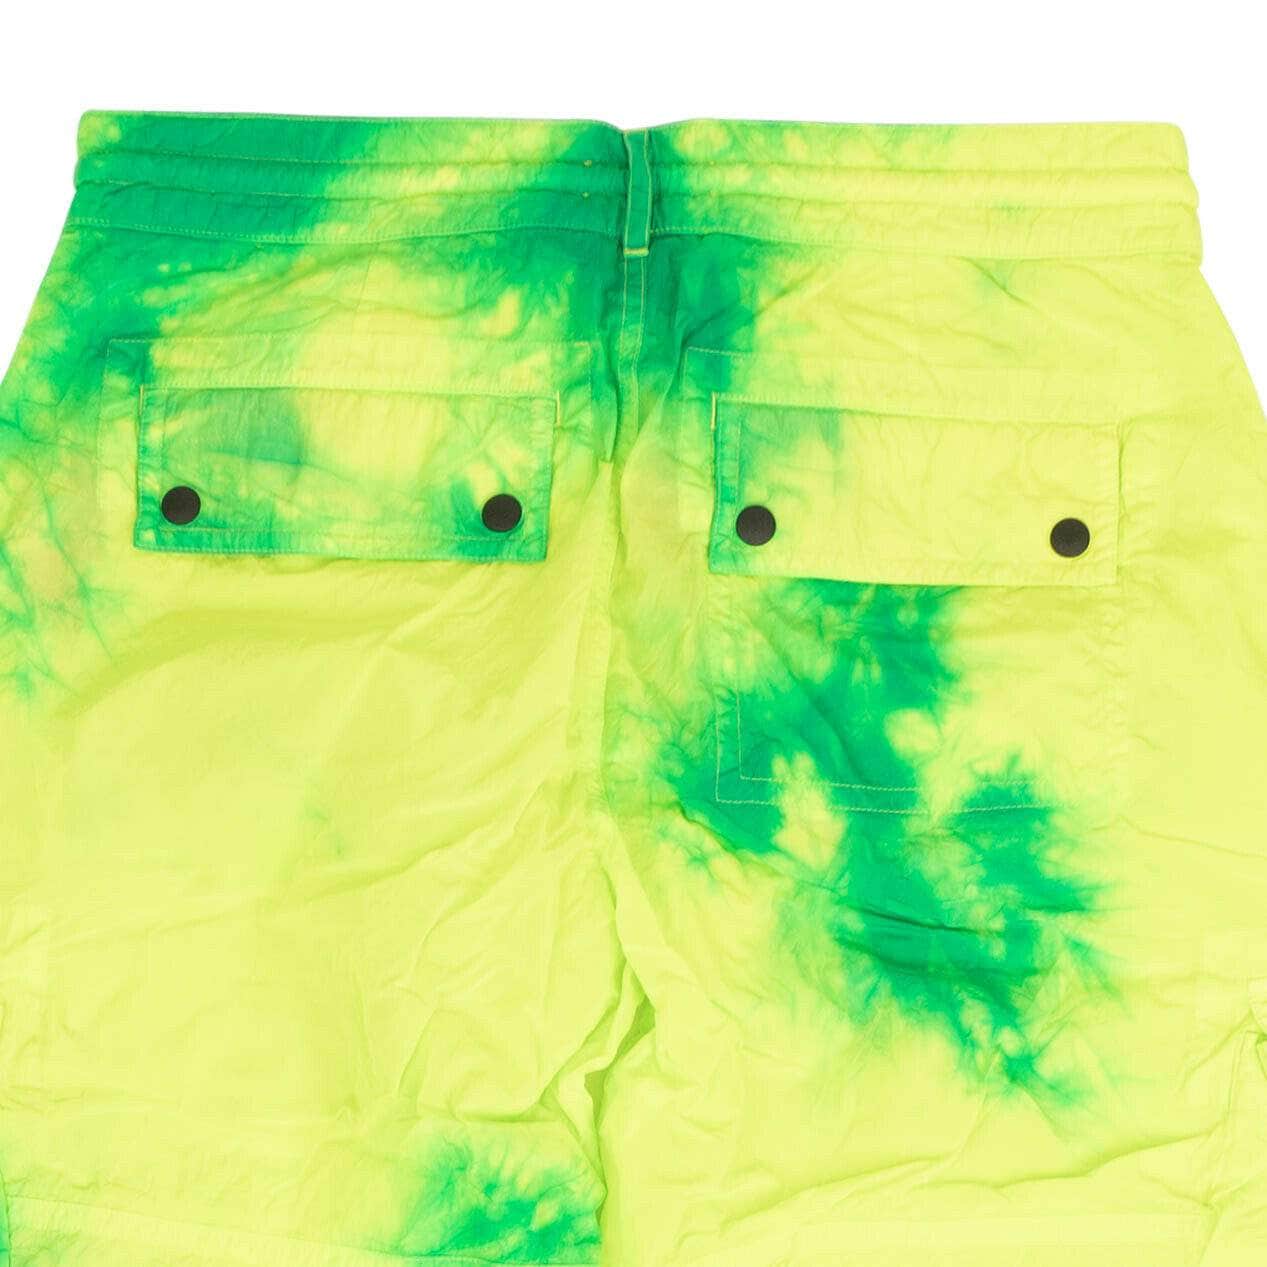 Palm Angels 500-750, channelenable-all, chicmi, couponcollection, gender-mens, main-clothing, mens-cargo-pants, mens-shoes, palm-angels, size-50, size-52 Green Tie Dye Cargo Pants